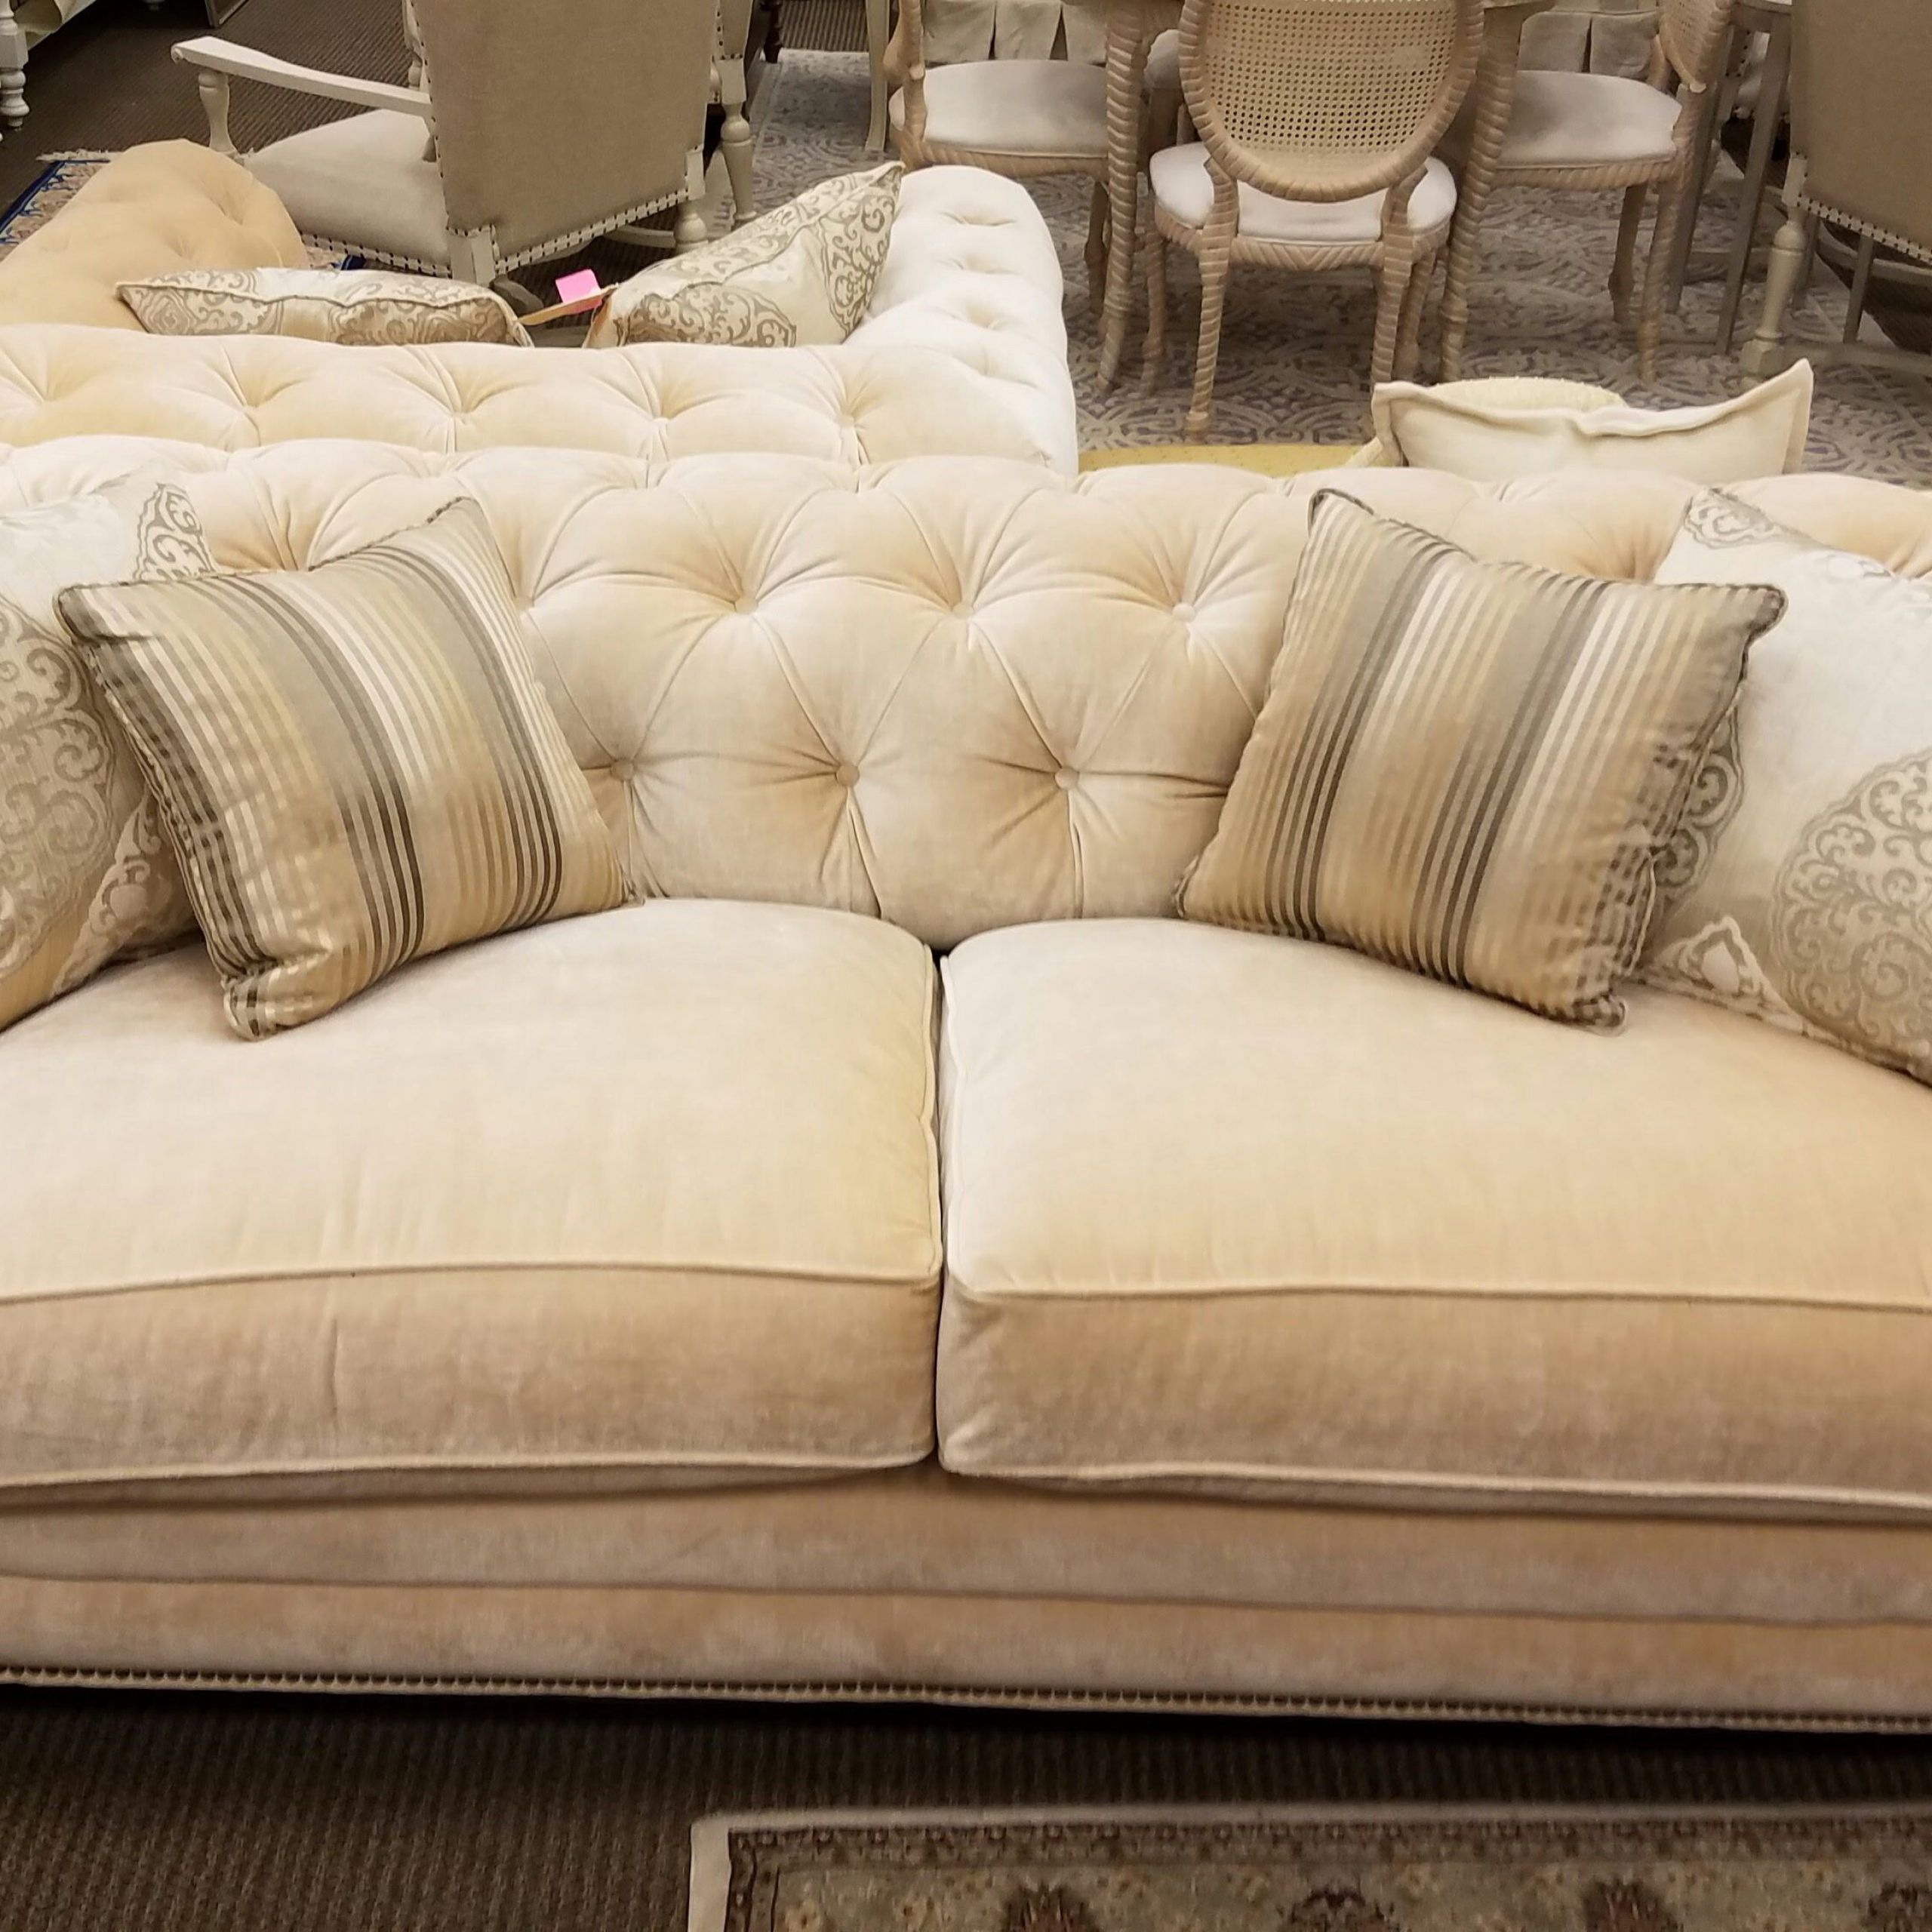 This Elegant Cream Tufted Sofa Is Priced At $495. | Cream Tufted Sofa Throughout Tufted Upholstered Sofas (Gallery 20 of 20)